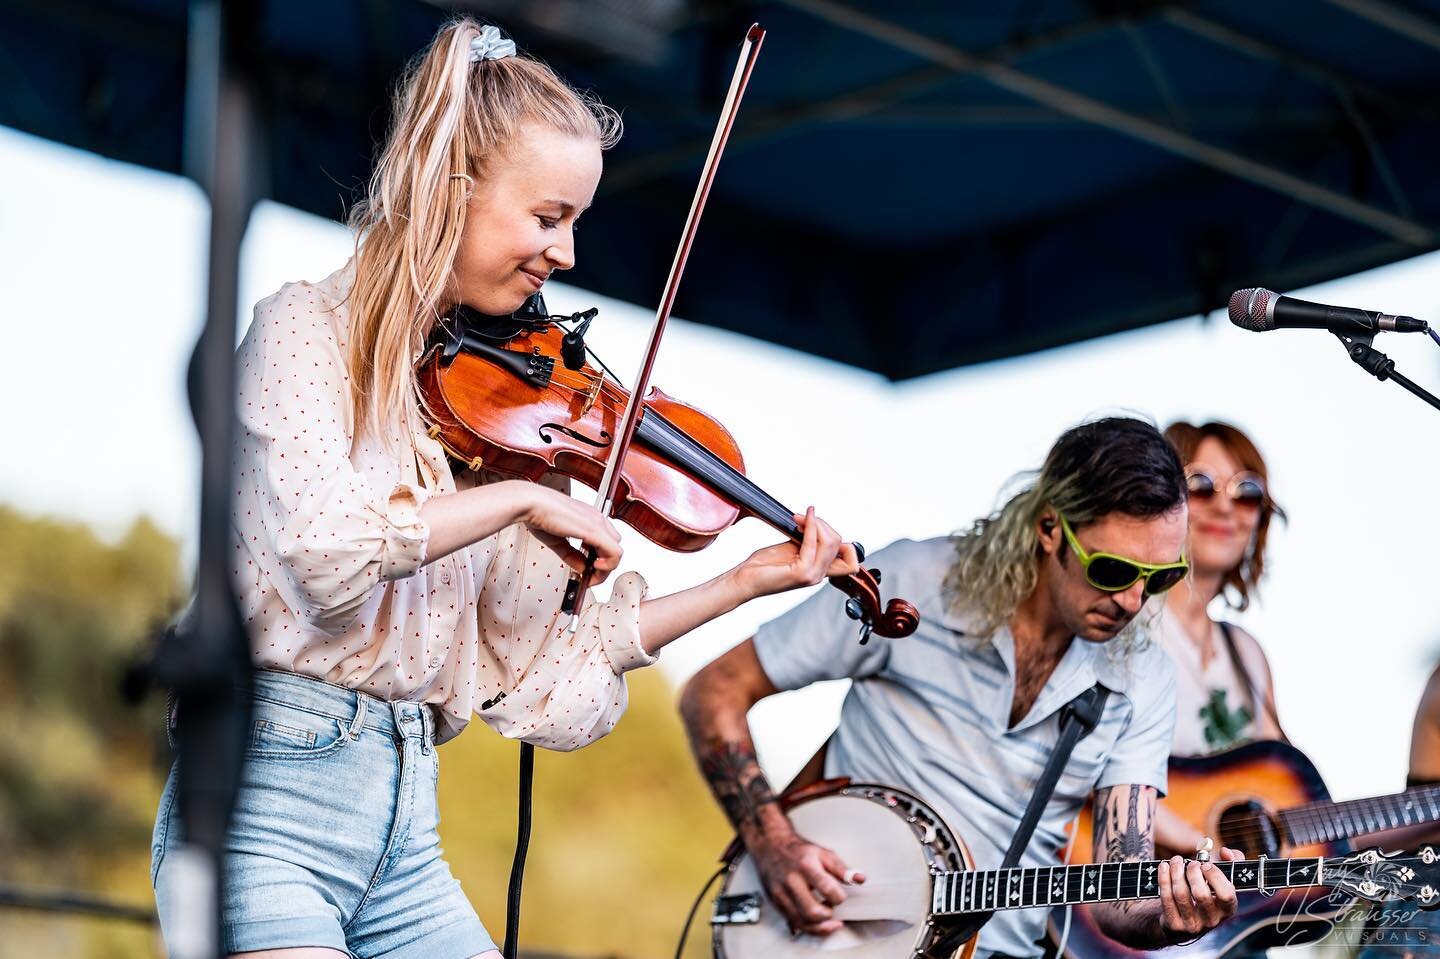 Can&rsquo;t wait for @stagecoach tomorrow 🌵let&rsquo;s pick in the desert! 📷 @jstrausser.visuals 
.
.
#stagecoach #countrymusic #country #fiddler #violinist #musicfestival